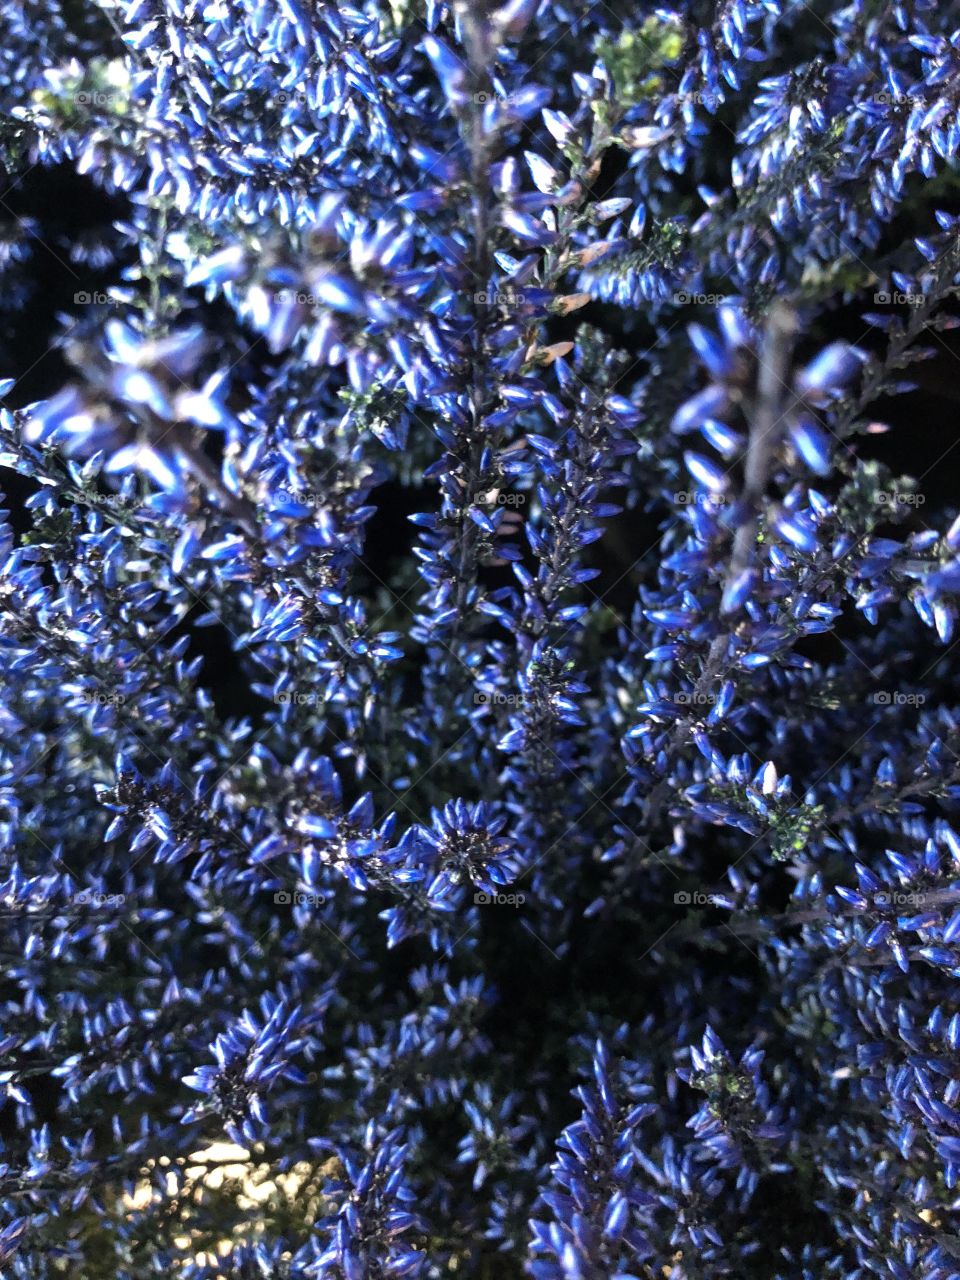 A royal blue heather oh well the richness of the color expands plenty of interest.